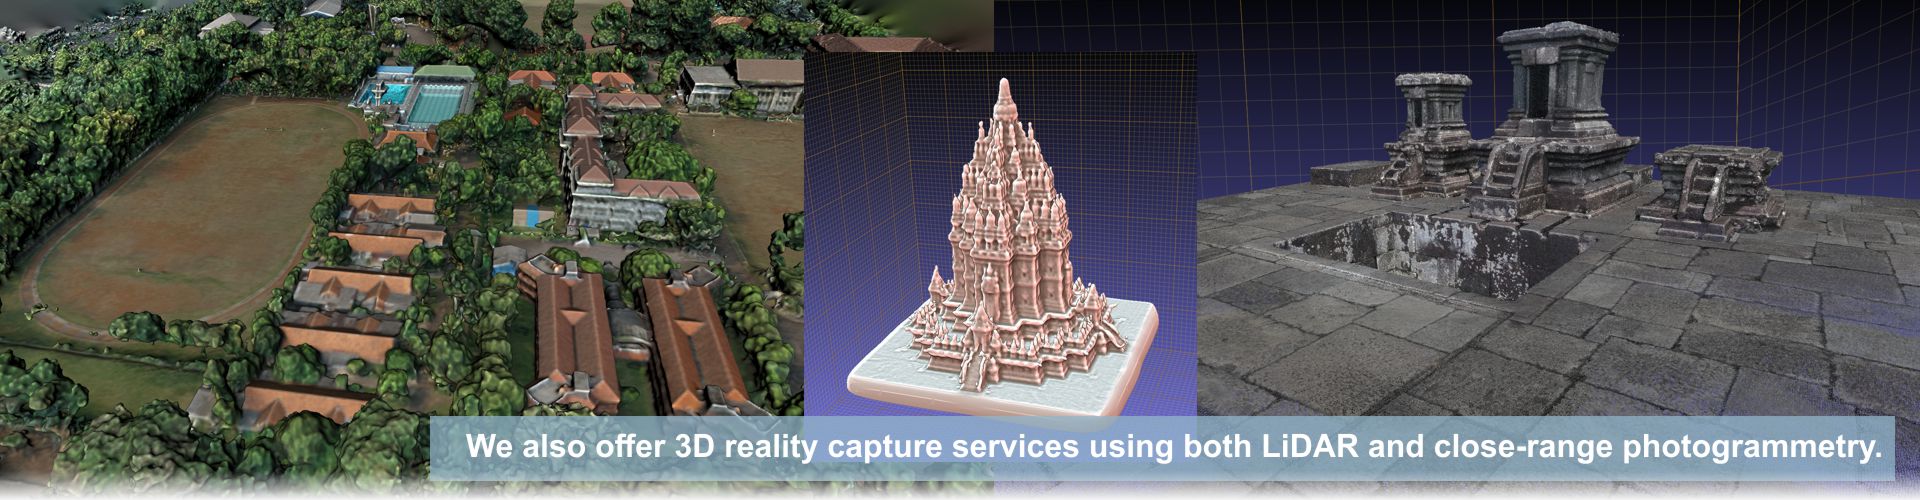 3d reality capture services using lidar and photogrammetry